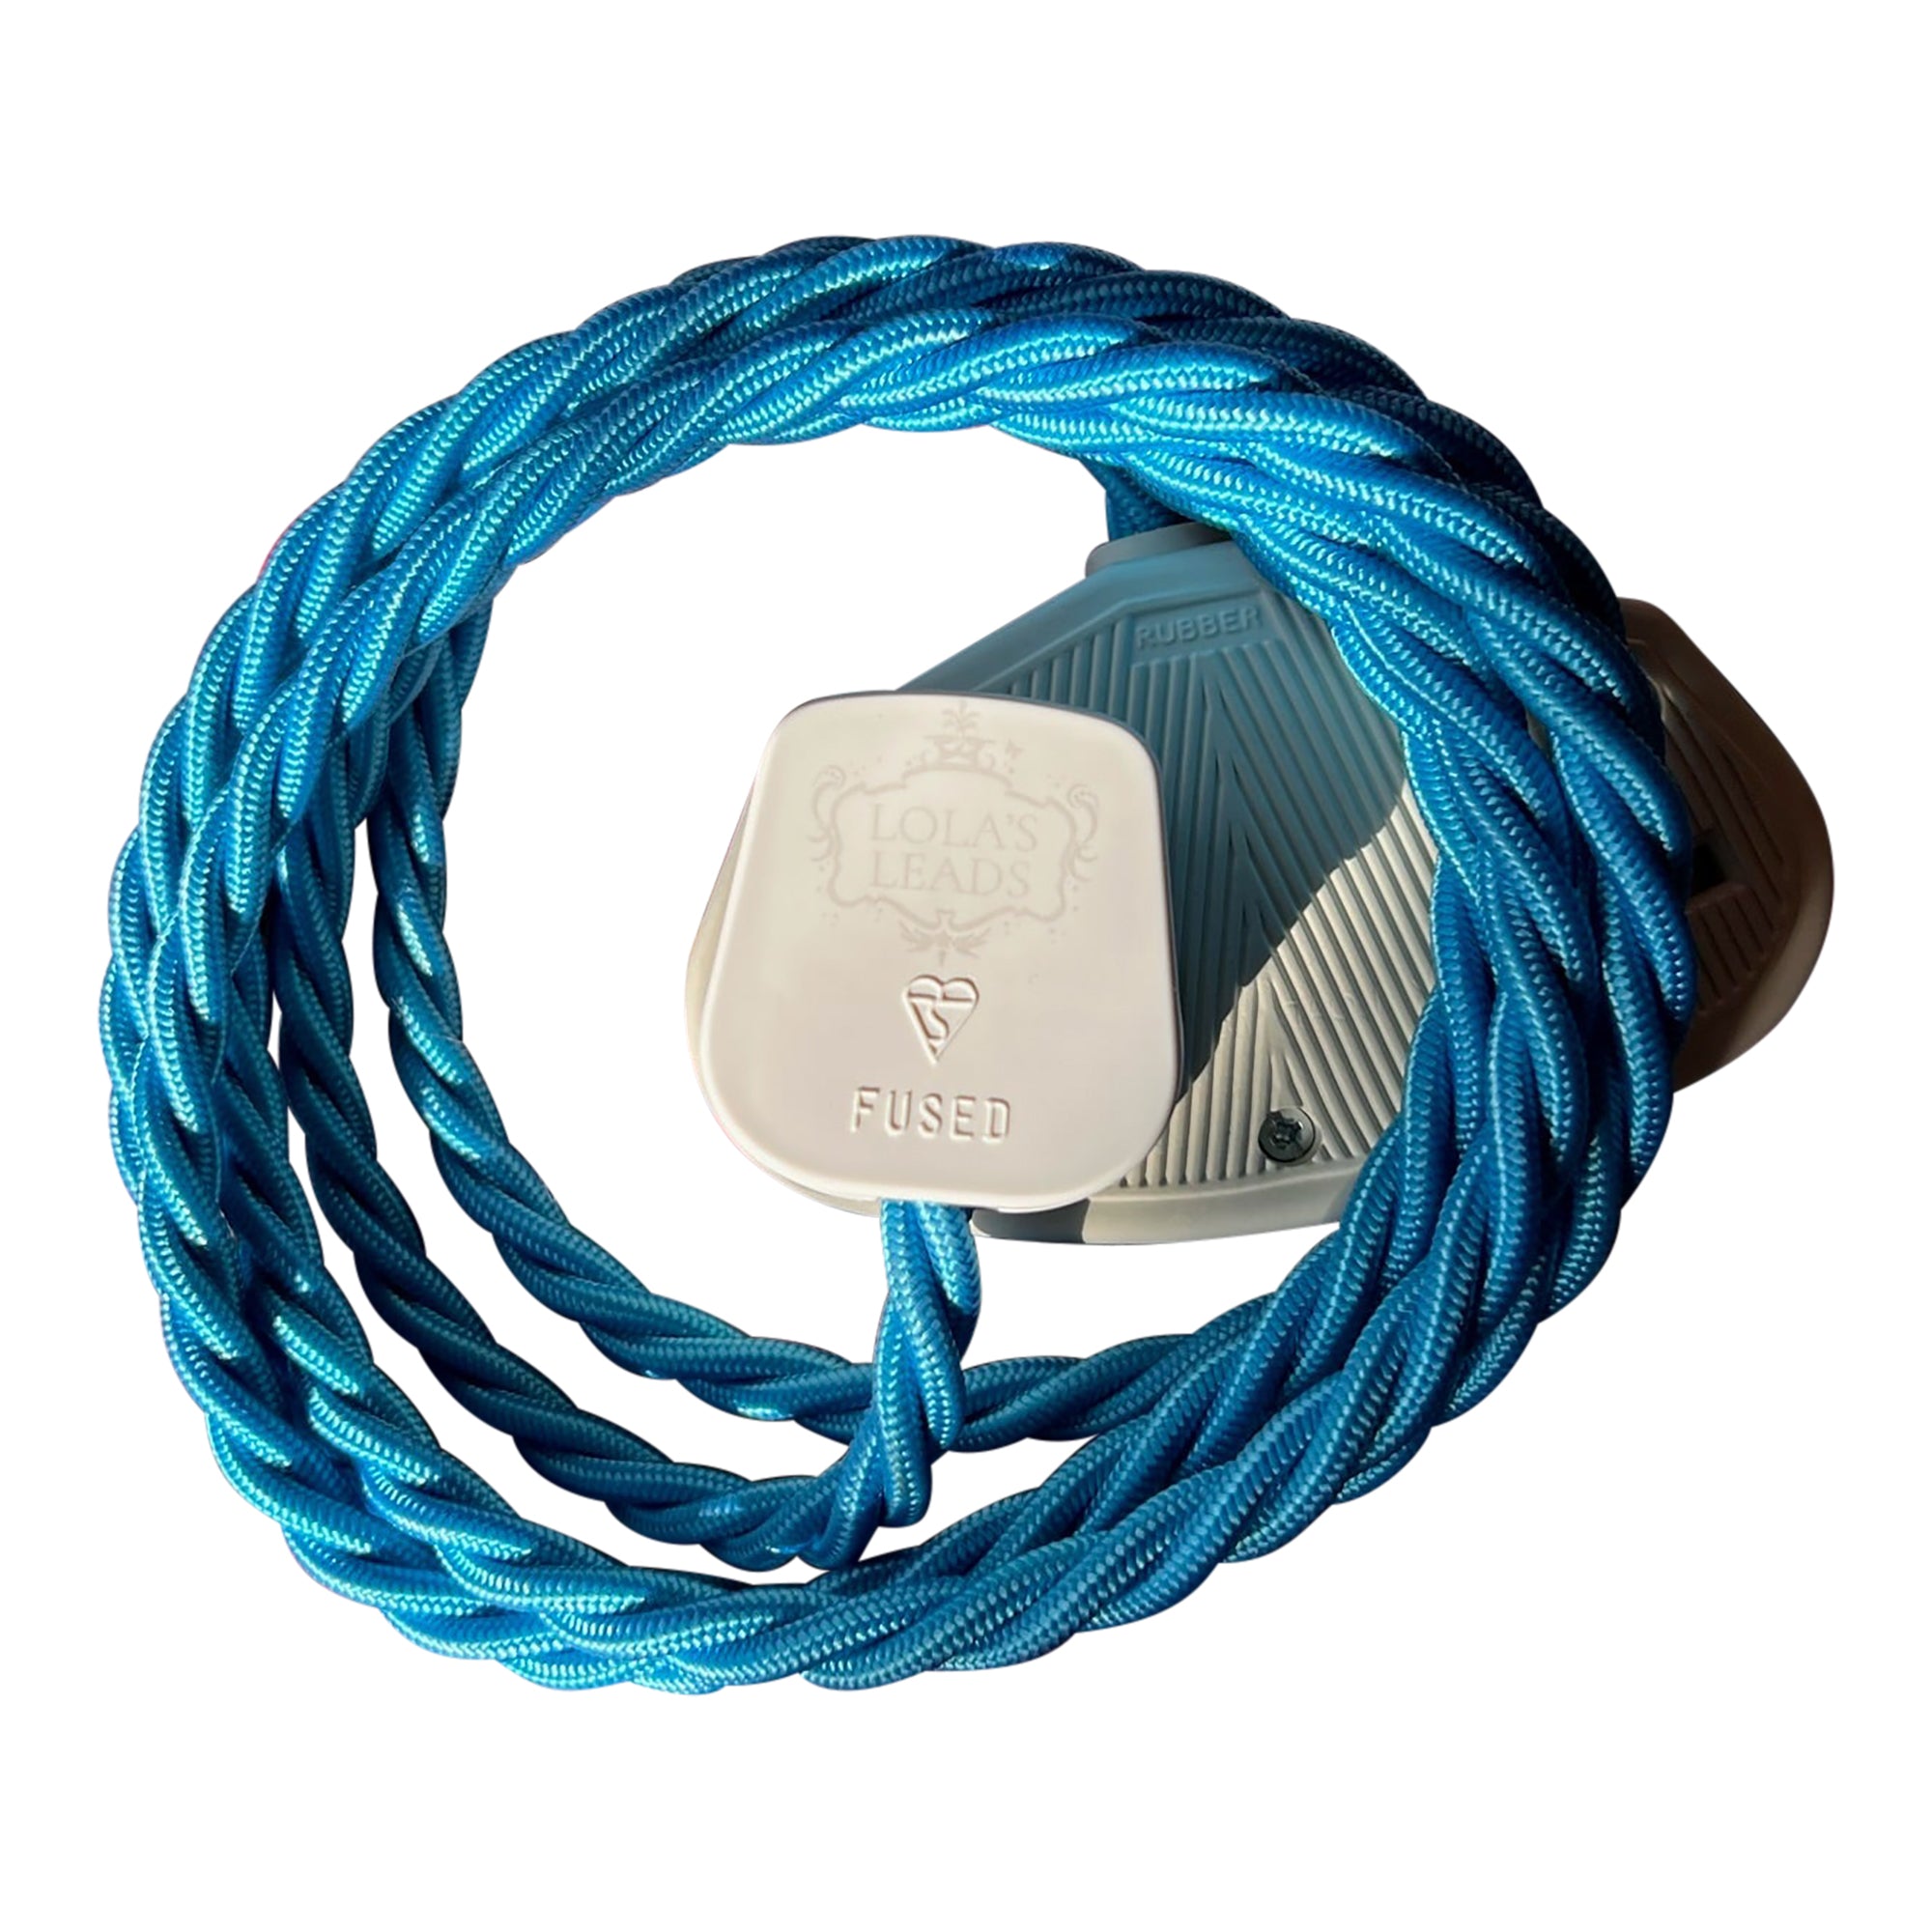 Azure - Lola's Leads Fabric Extension Cable